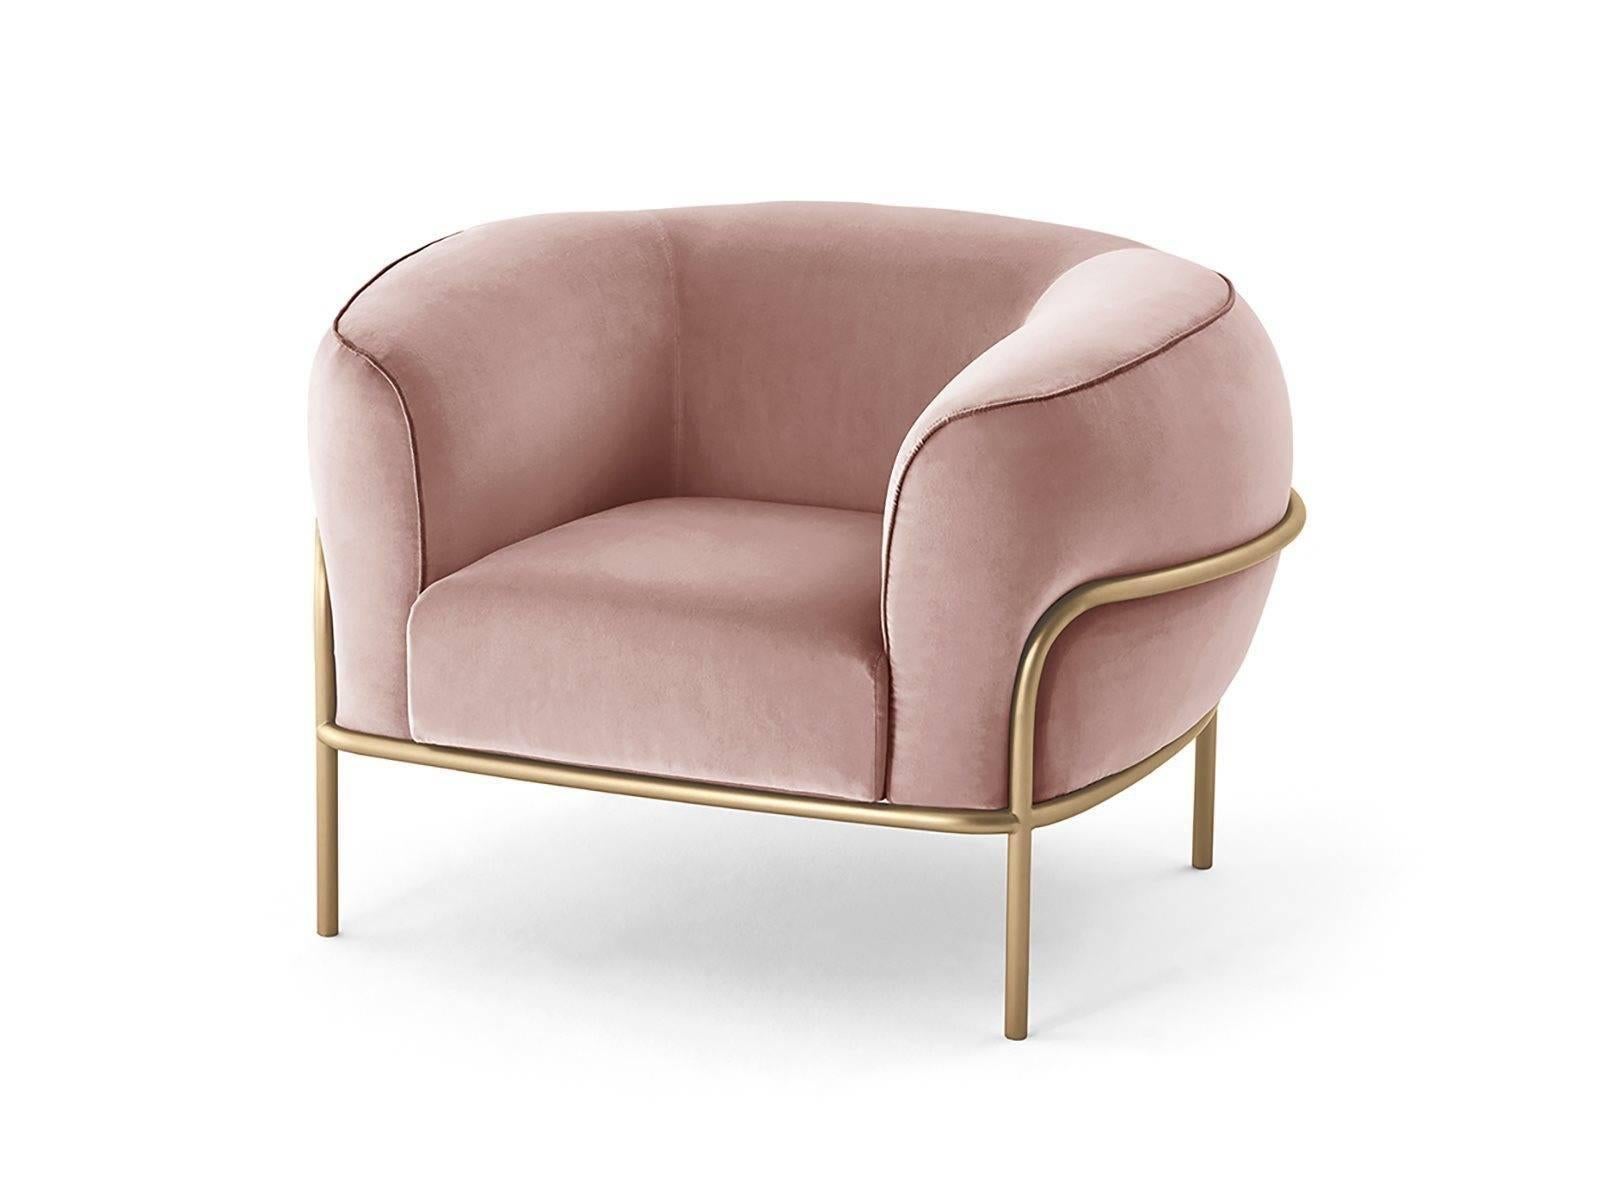 Sophie armchair in fabric, leather or velvet with brass details designed by Federica Biasi for Gallotti & Radice. 

Armchair with foam polyurethane padding. Removable cover in fabric or leather, available as per samples. Metal structure in satin